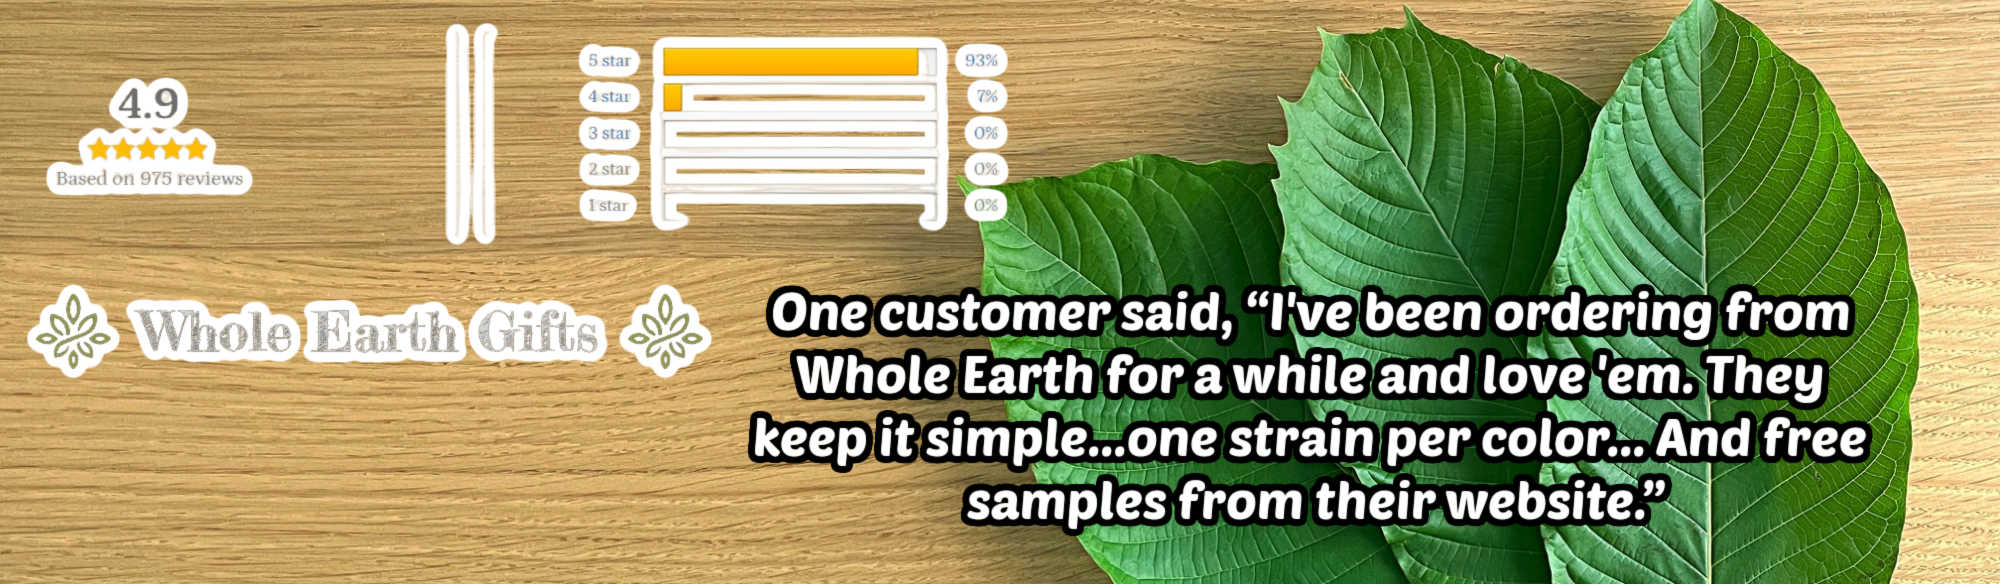 image of whole earth gifts customer reviews